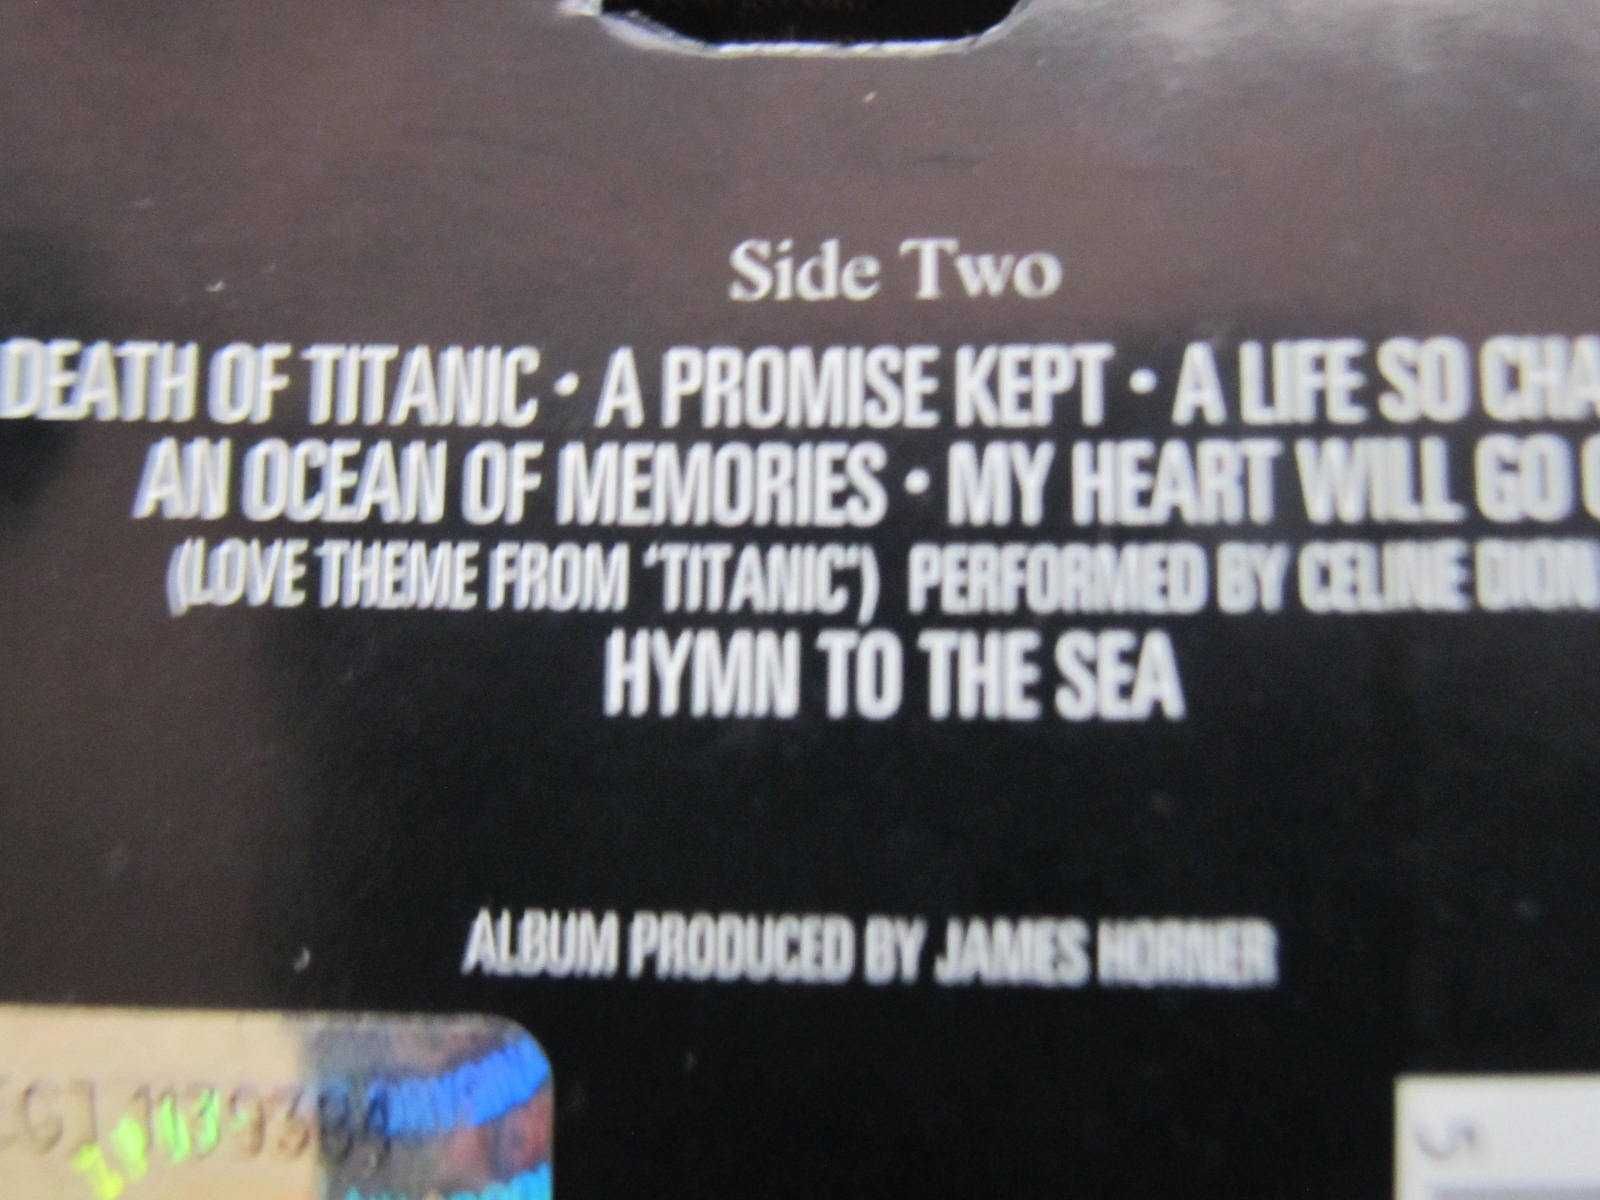 Kaseta audio- Titanic -Music from the motion picture